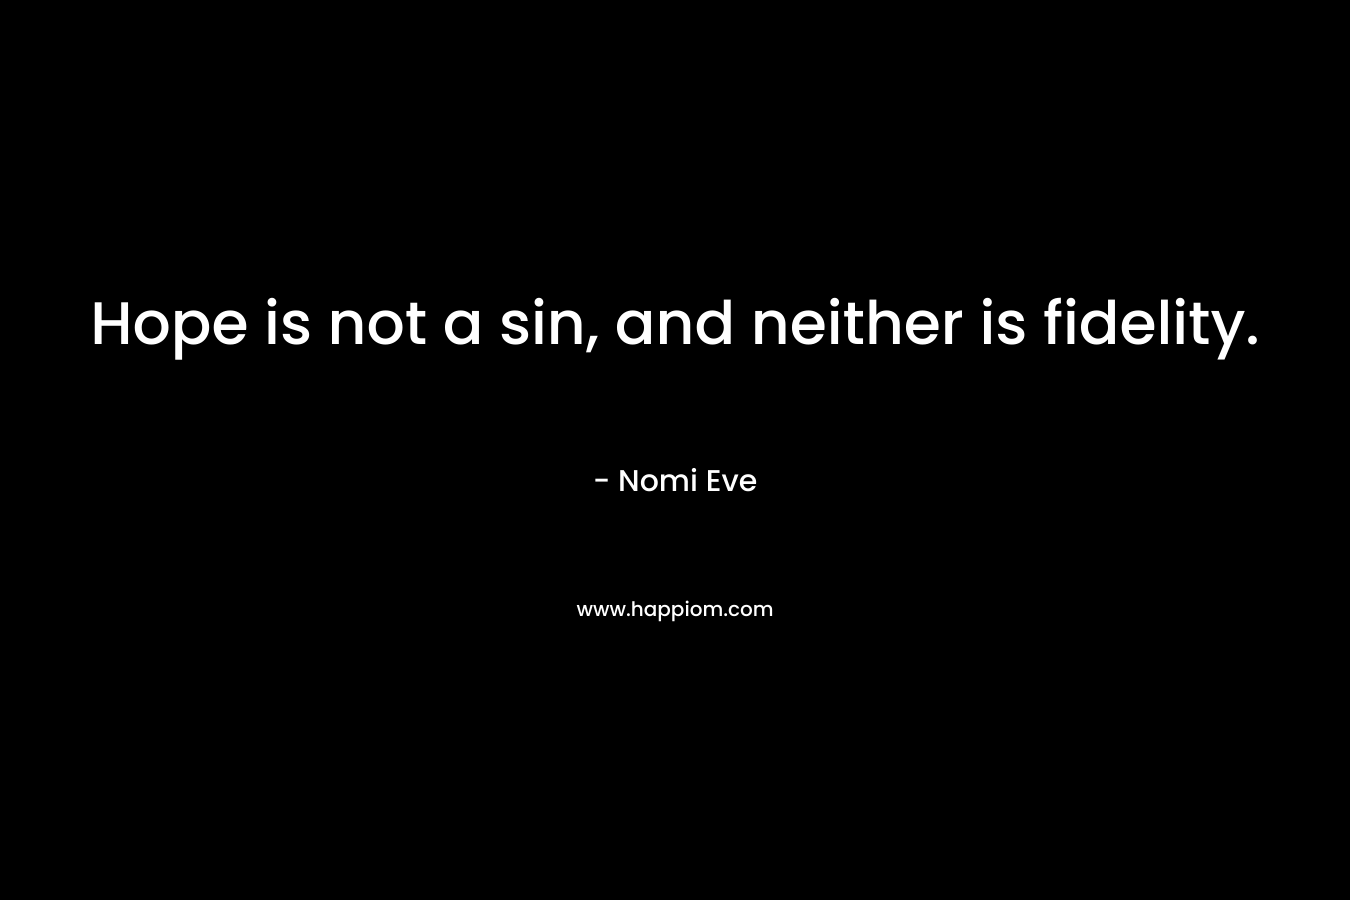 Hope is not a sin, and neither is fidelity.